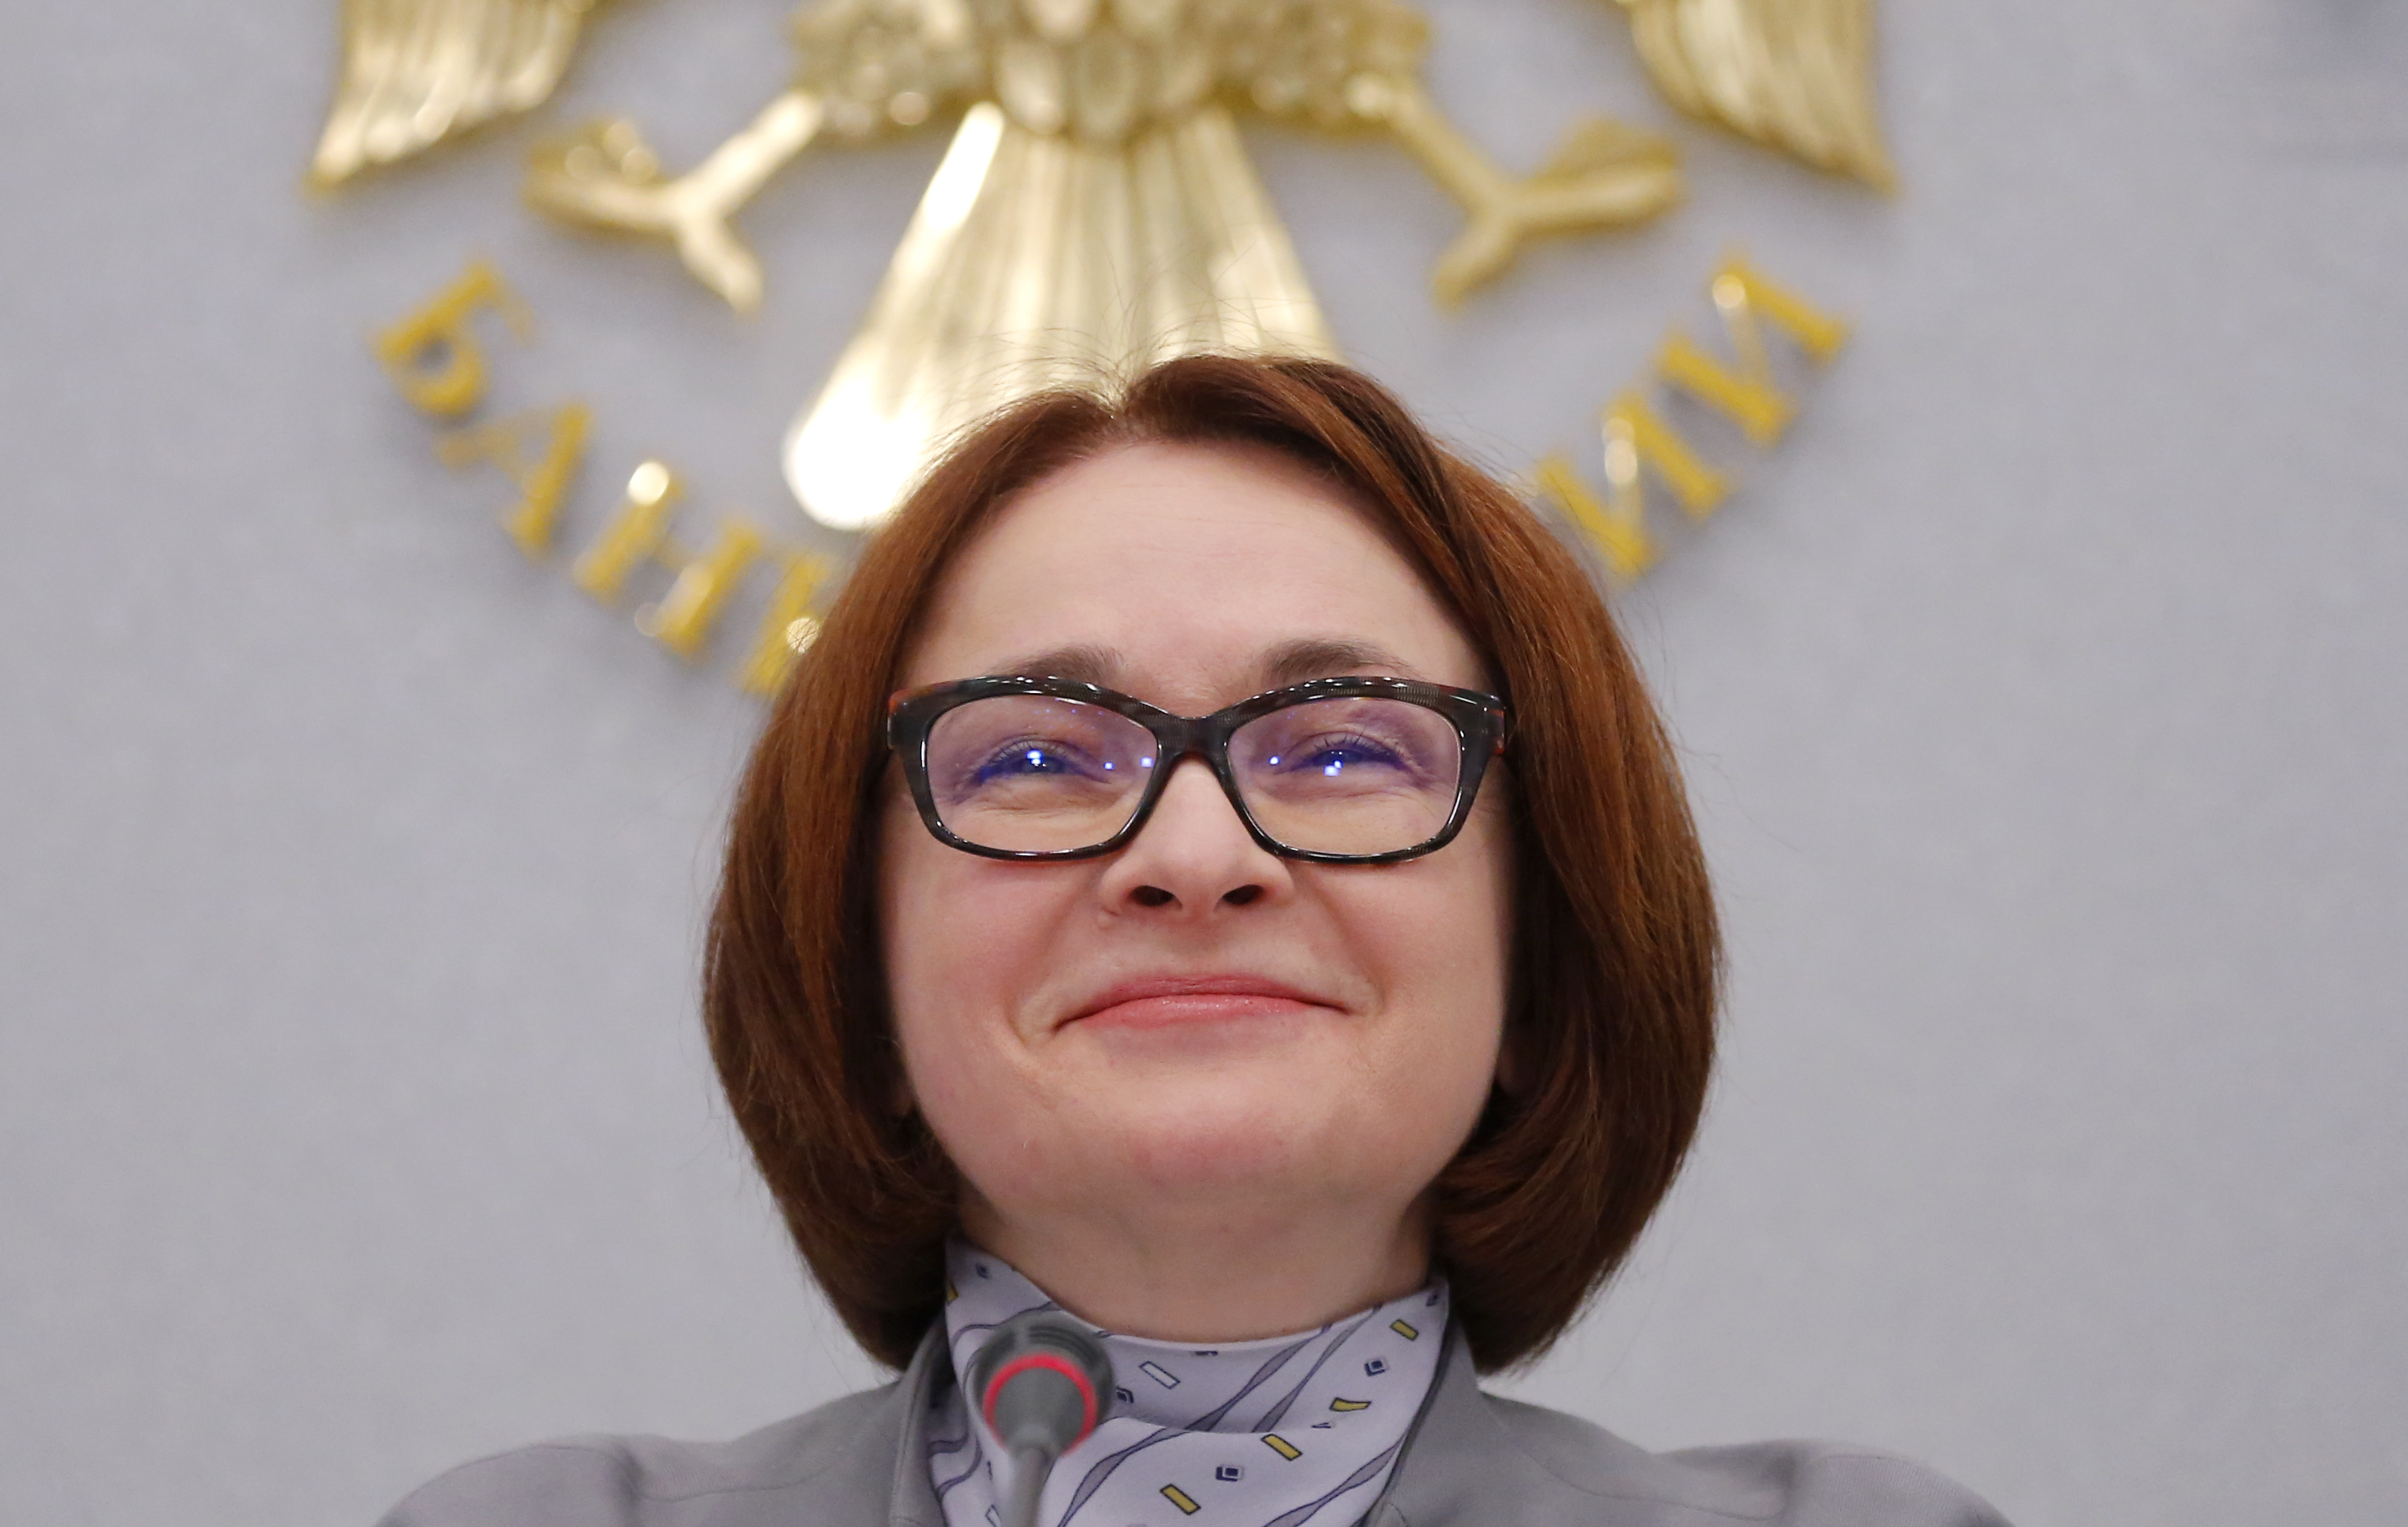 Russian central bank governor Elvira Nabiullina reacts during a news conference in Moscow, Russia, December 16, 2016. REUTERS/Maxim Shemetov - RTX2VBQ7